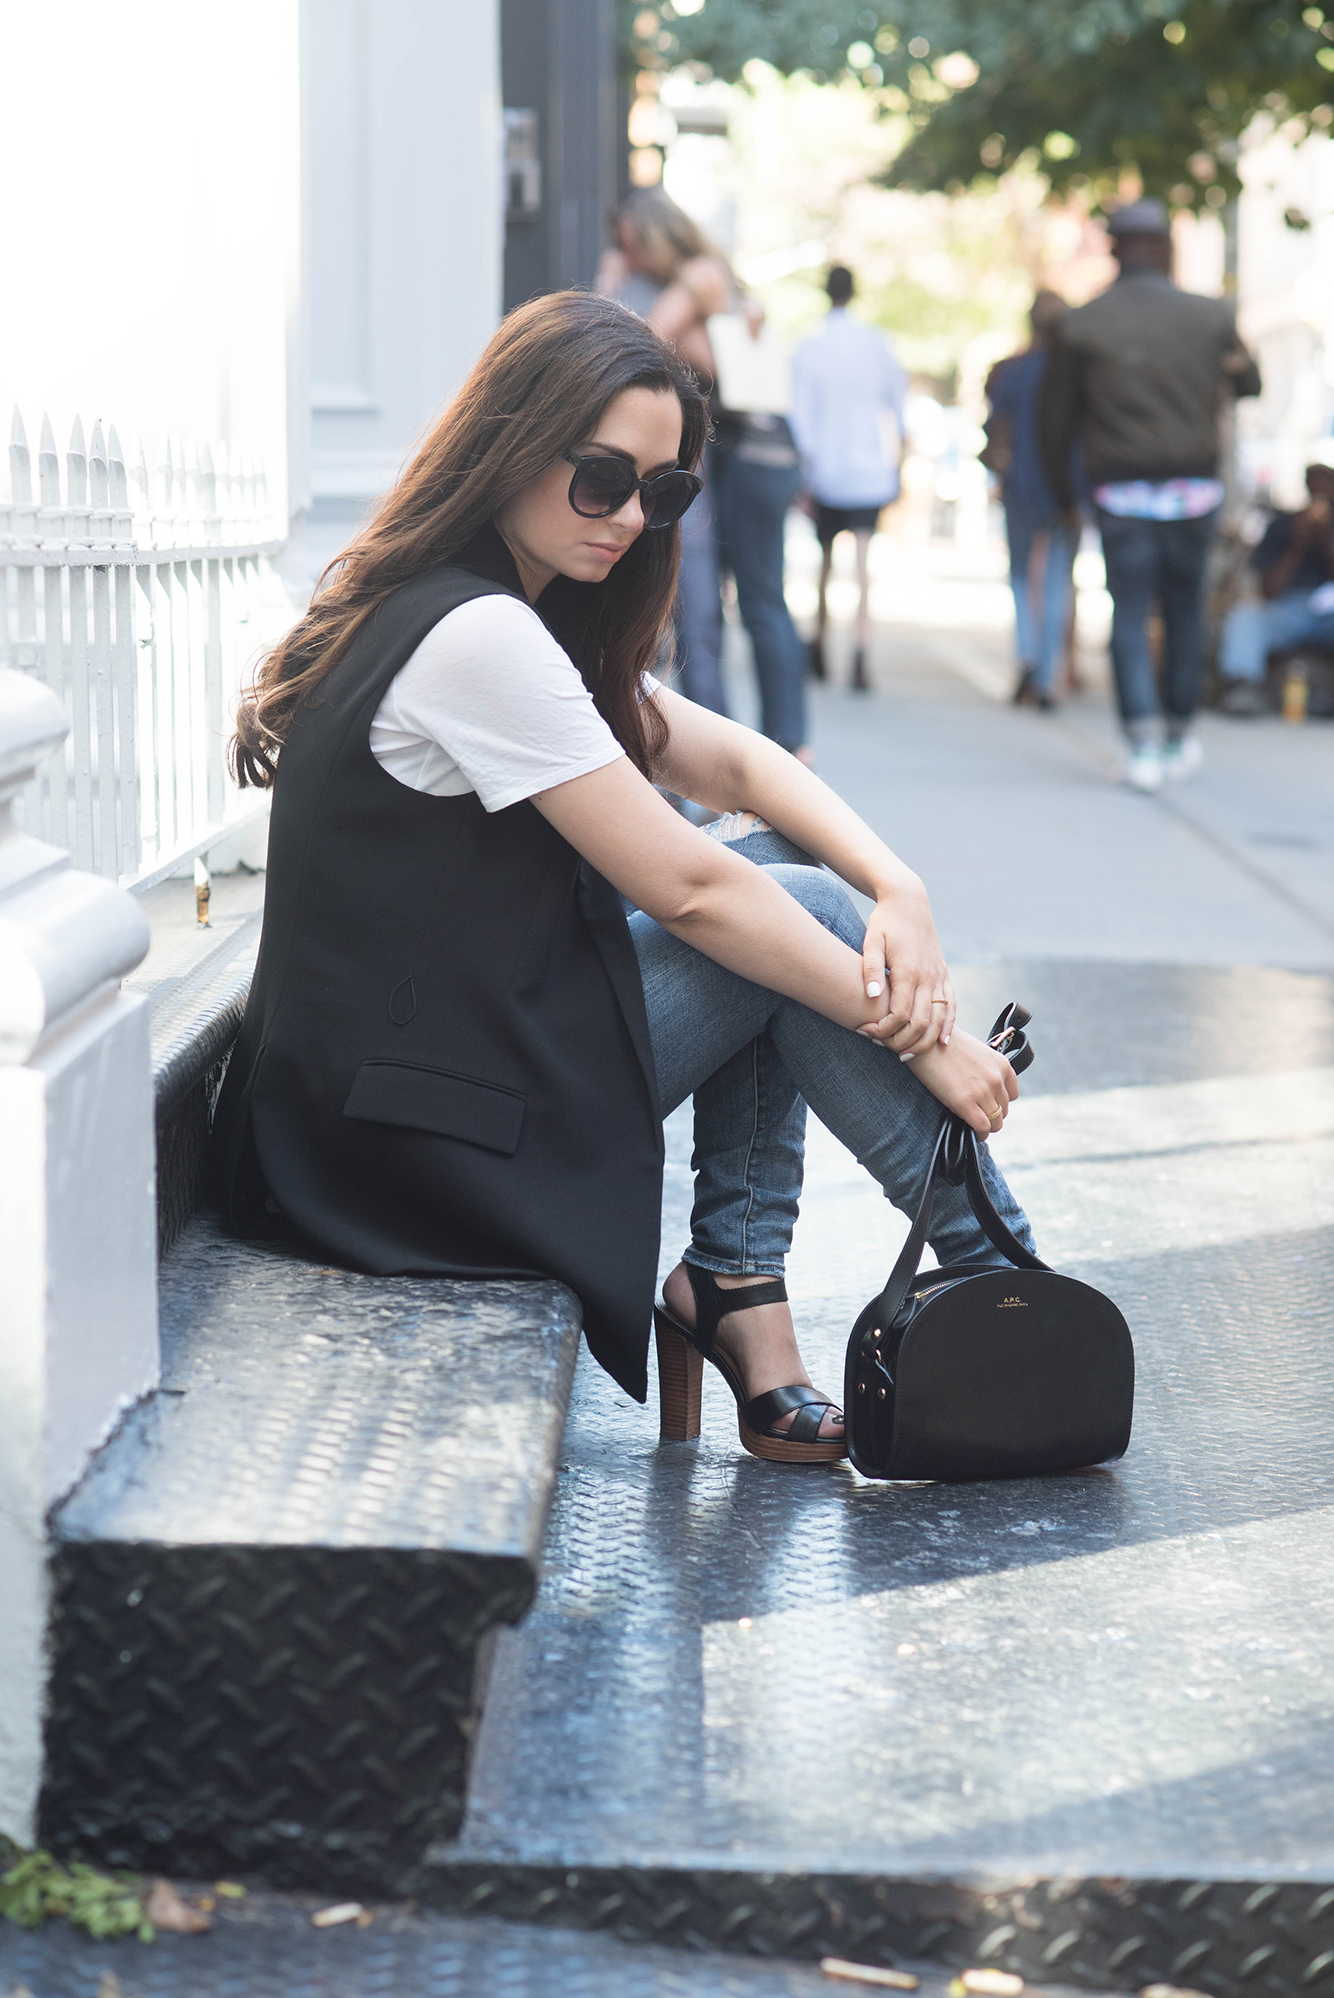 coco-and-vera-best-vancouver-style-blog-best-canadian-style-blog-top-blogger-street-style-revolve-me-zara-vest-white-tee-lovers-and-friends-jeans-apc-halfmoon-bag-le-chateau-sunglasses